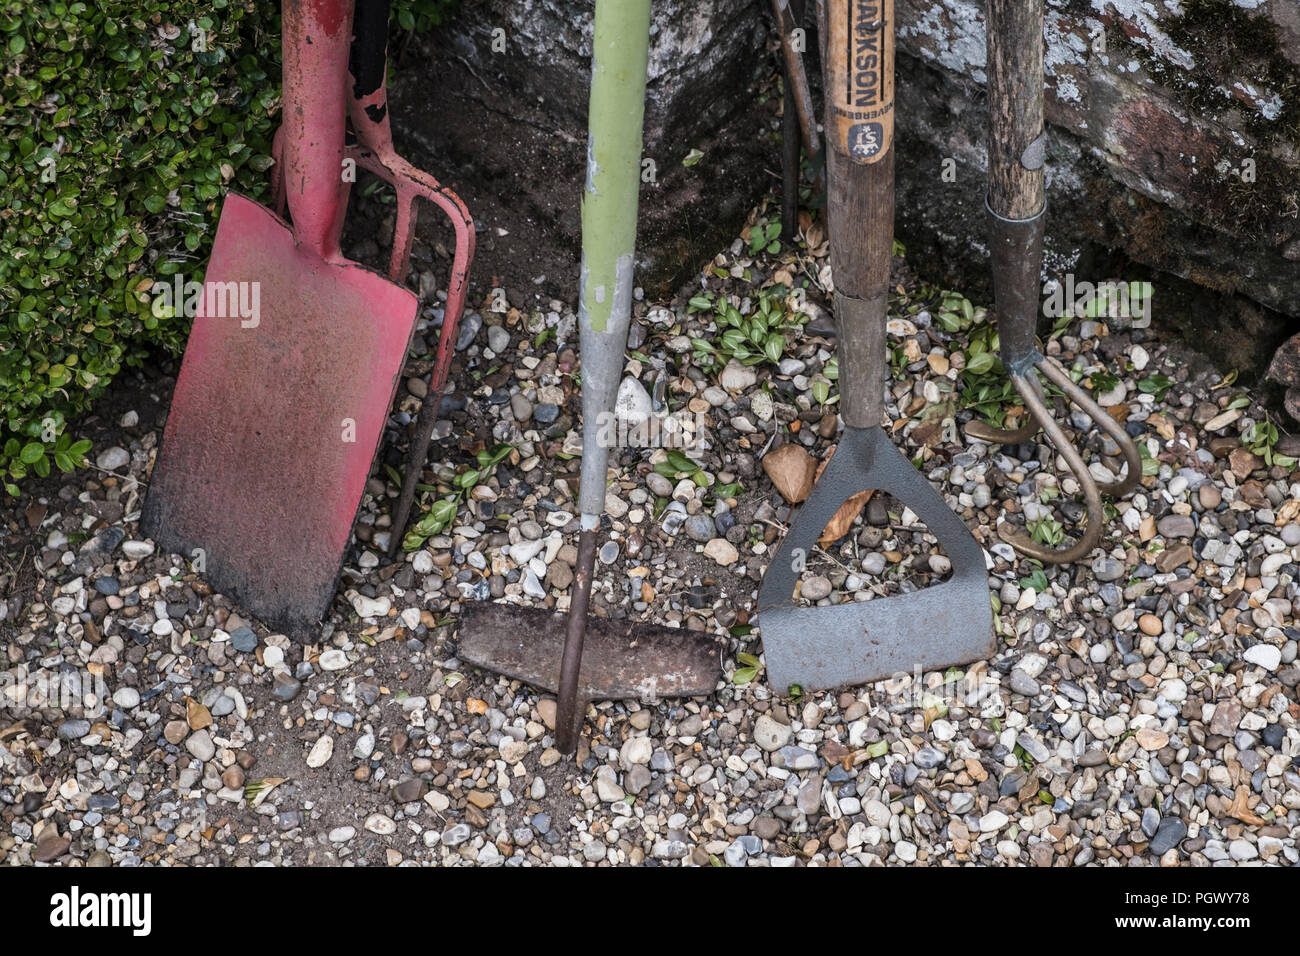 Long handled garden tools including fork, spade, hoe and rake Stock Photo -  Alamy